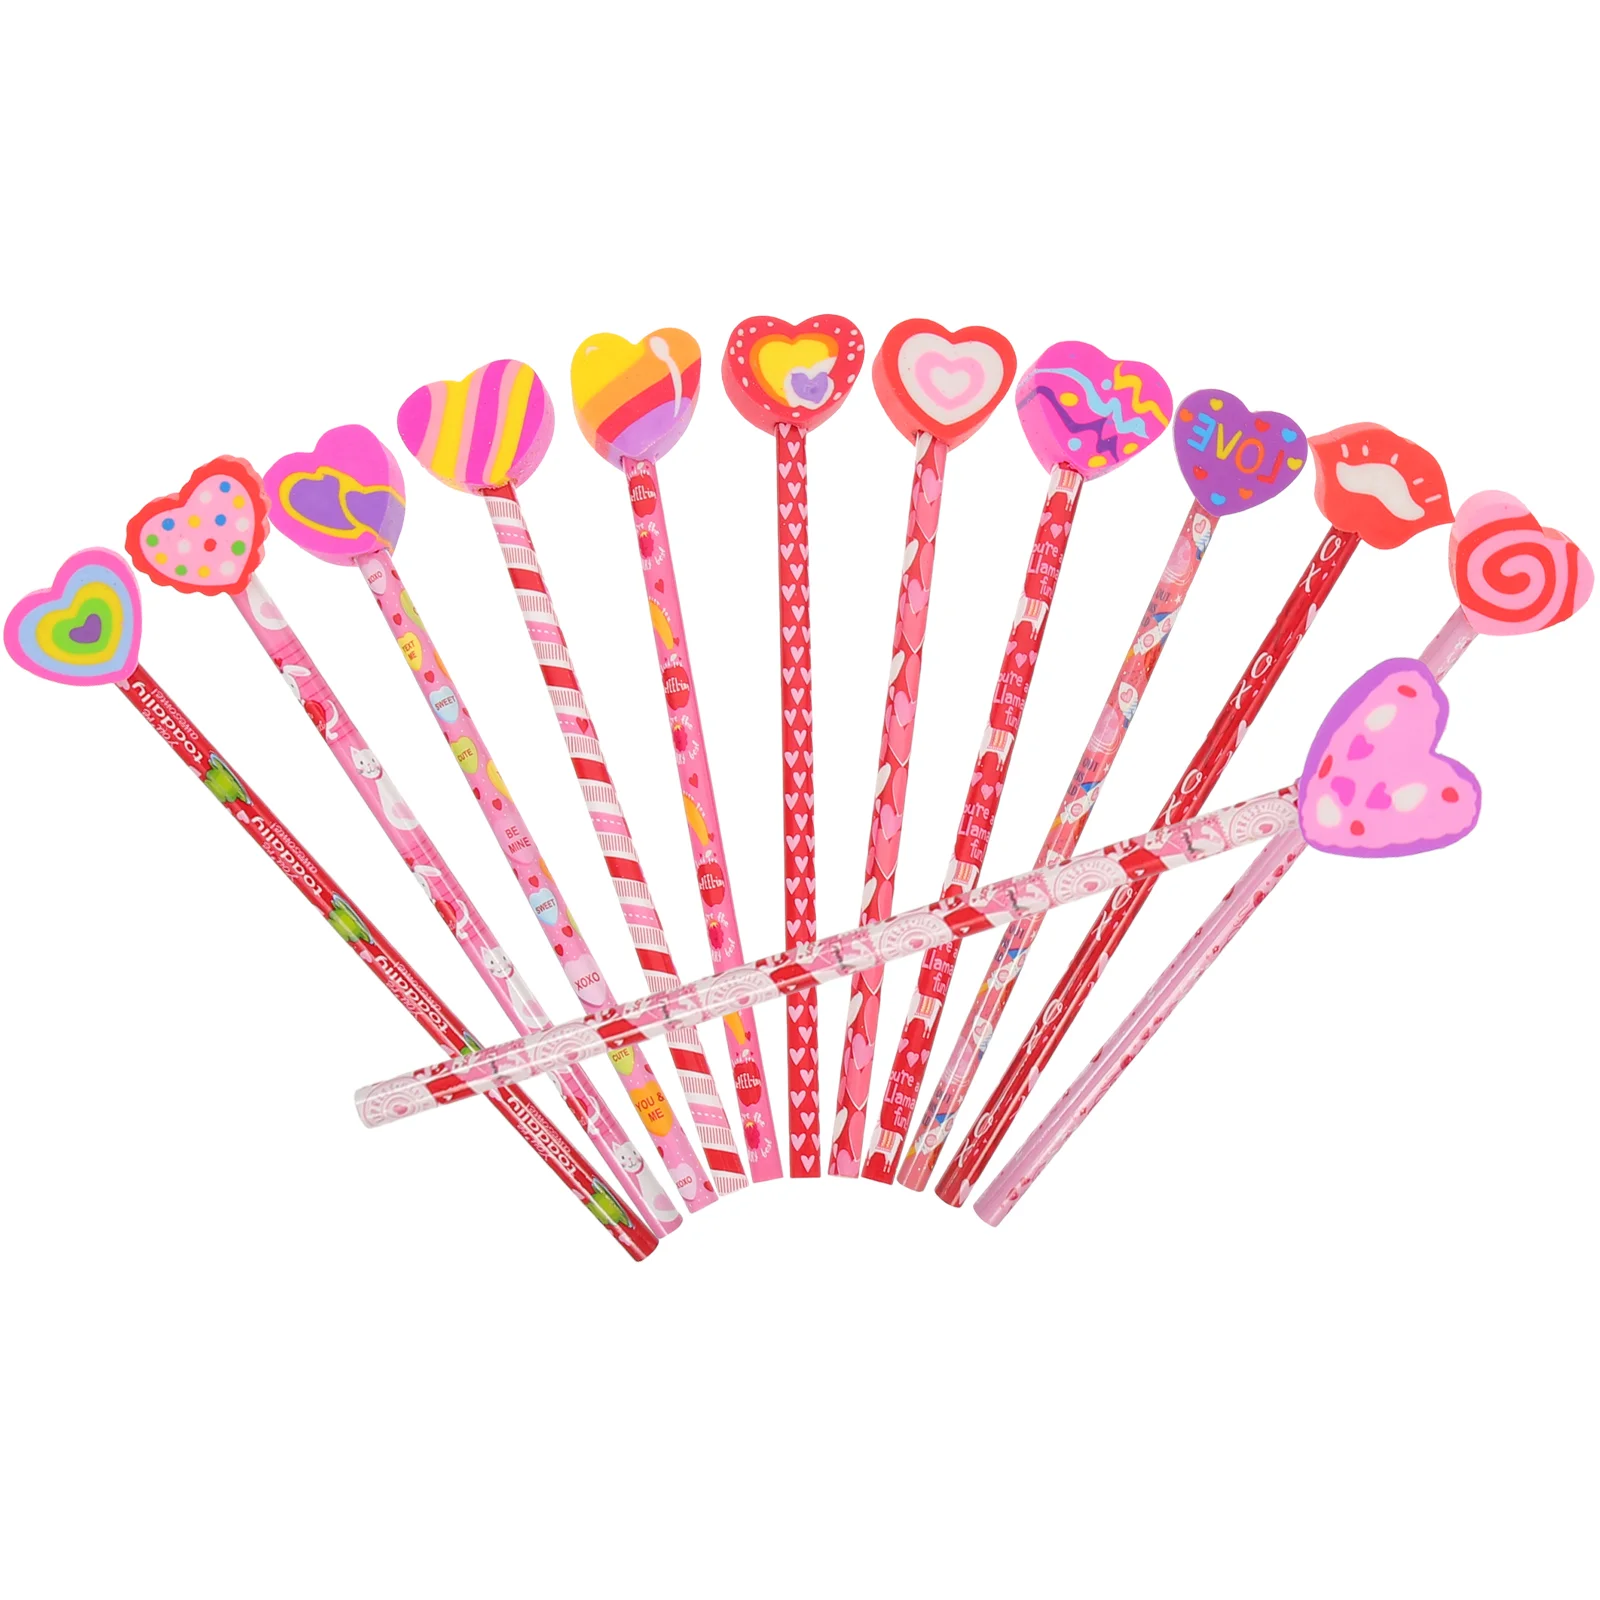 

12 Pcs Valentine's Day Pencil Children Writing Pencils Decorate Prize Gifts Wood Portable Kids